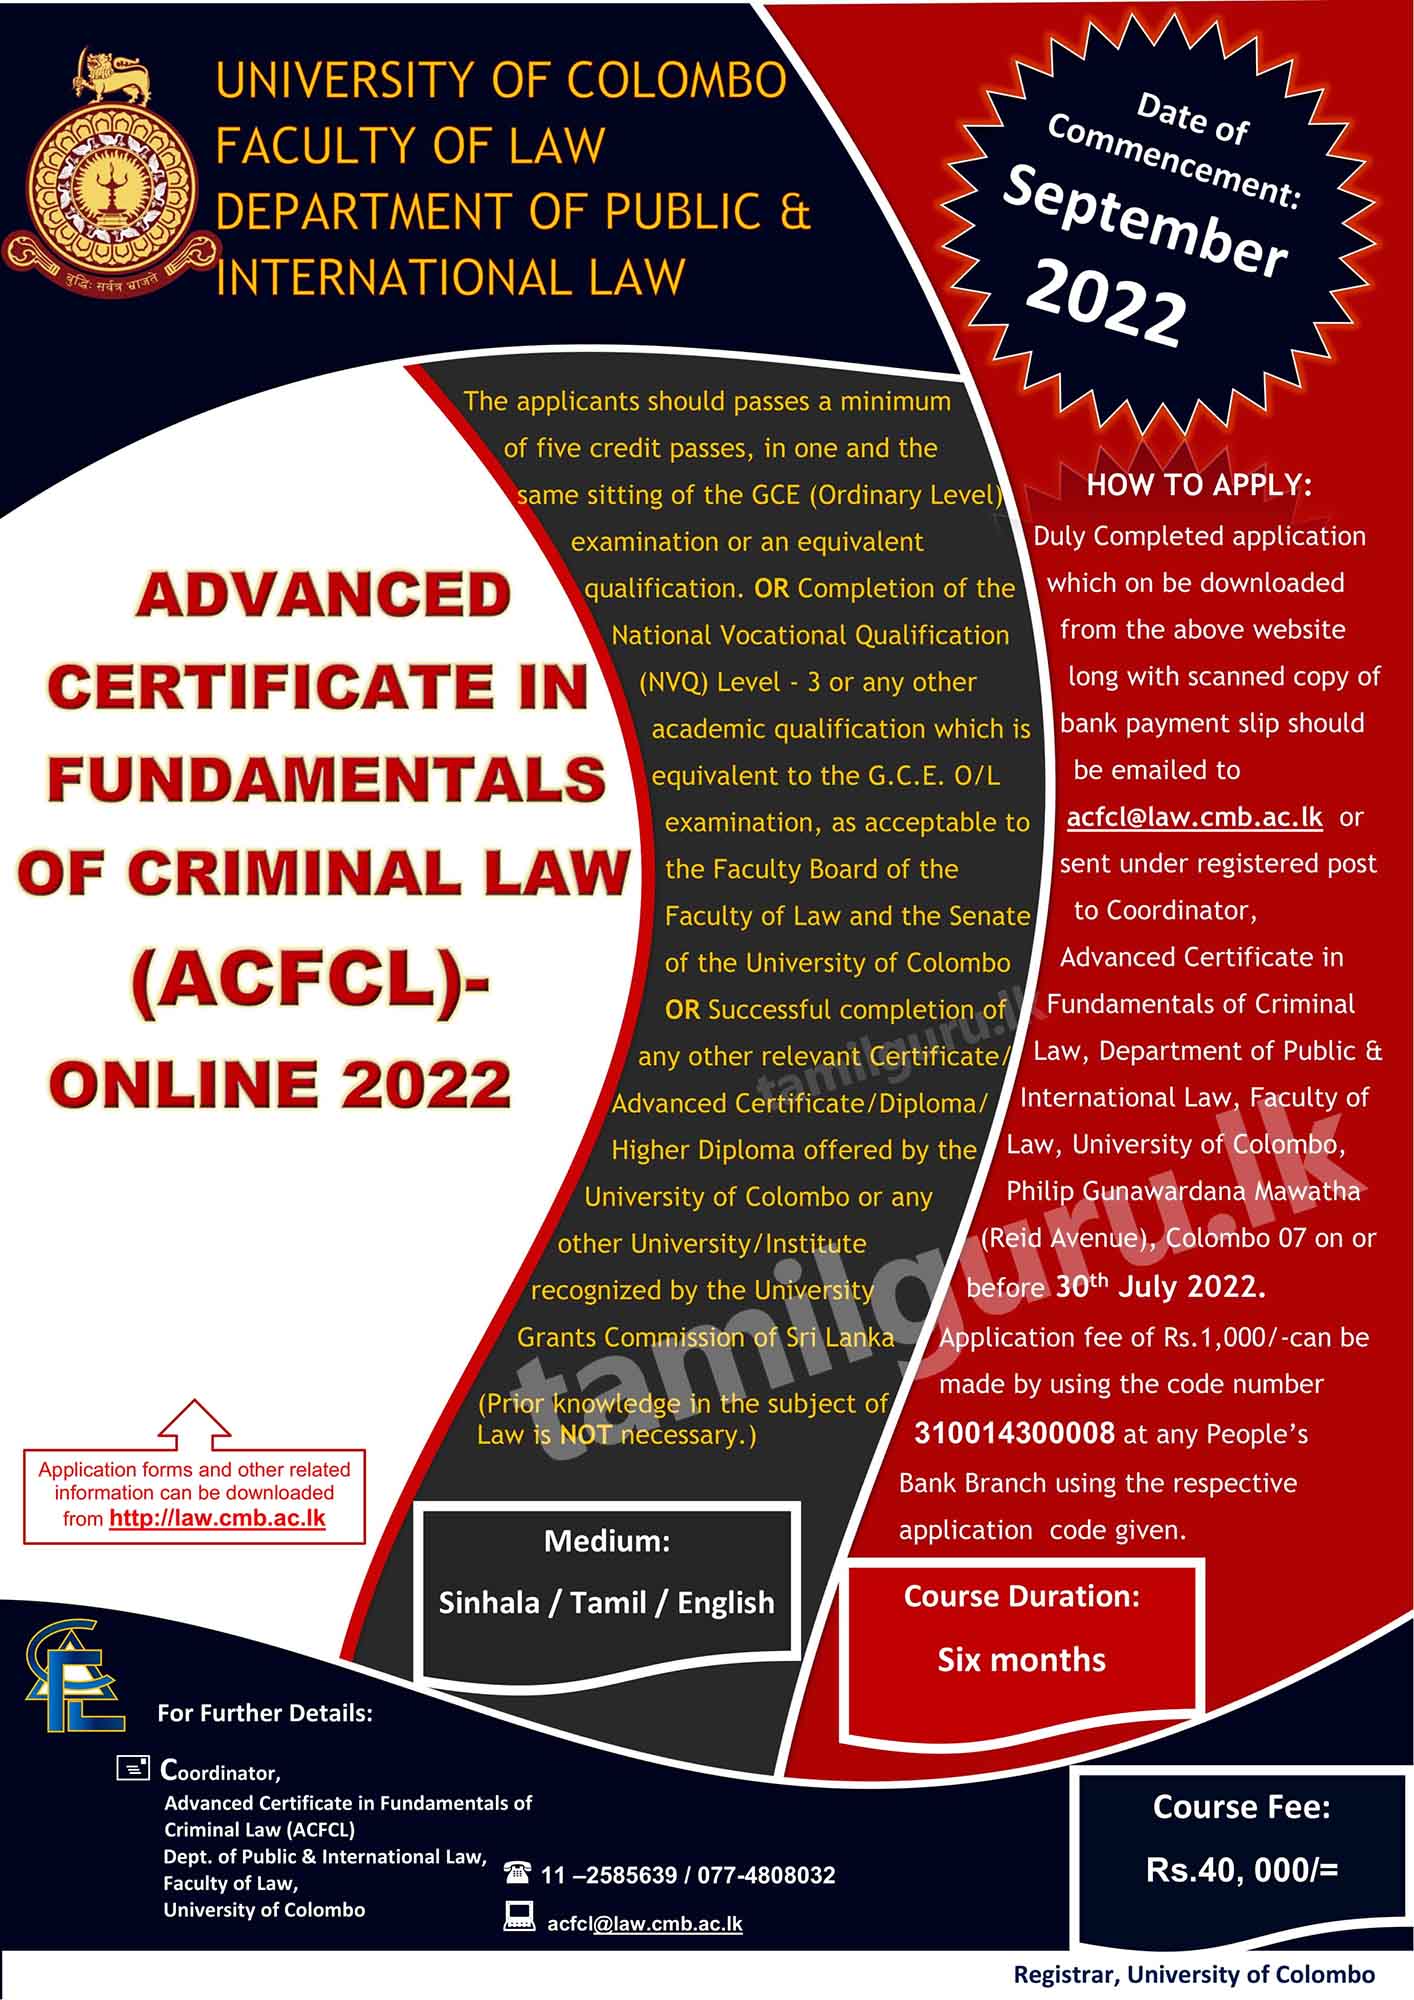 Advanced Certificate in Fundamentals of Criminal Law (ACFCL) 2022 - University of Colombo (Details in English)